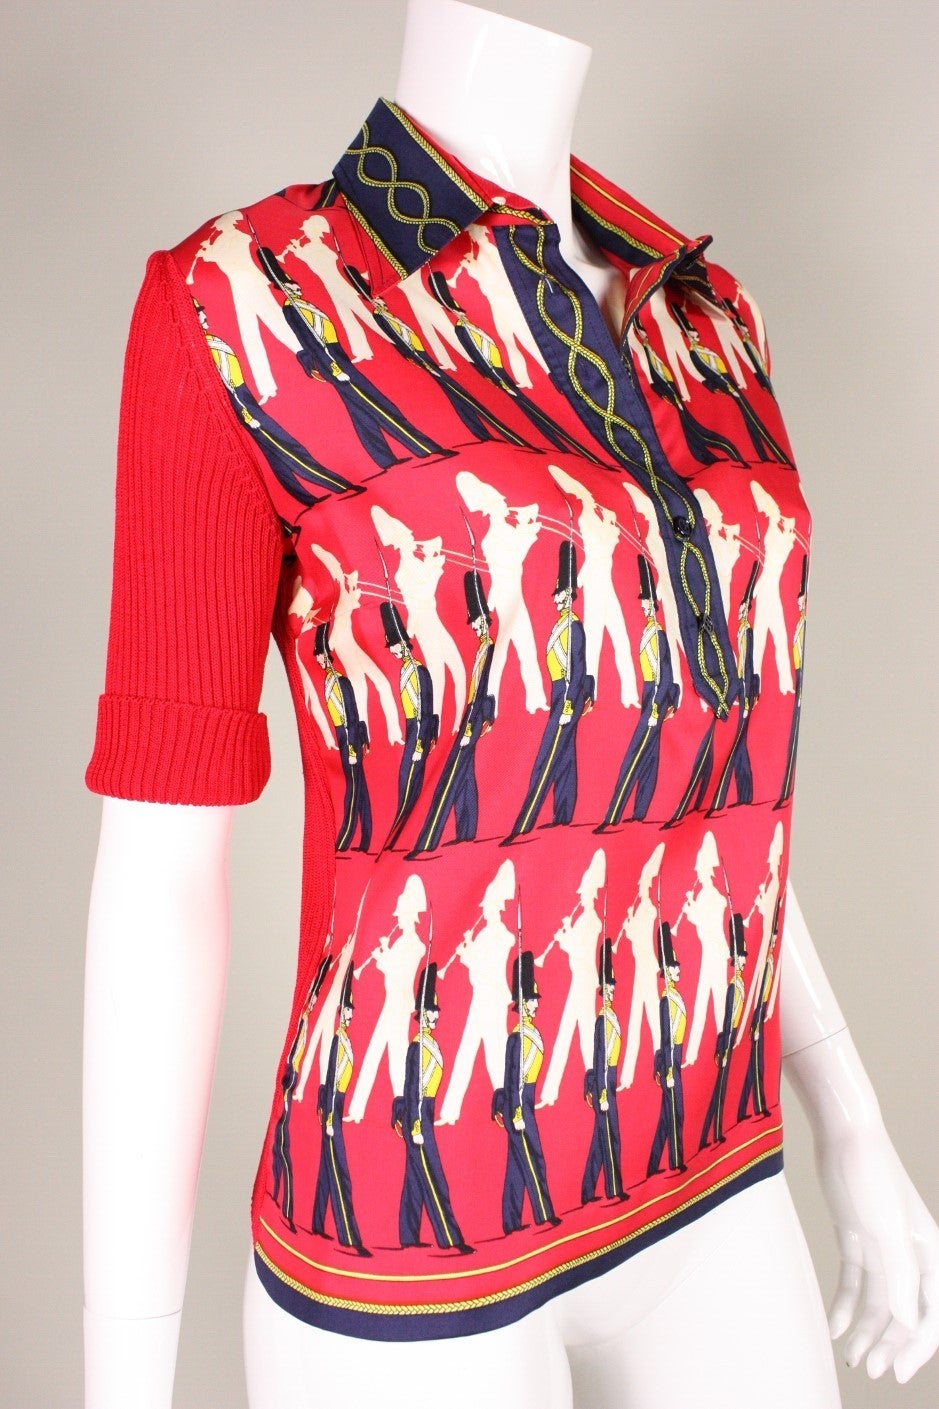 Vintage Hermès sweater dates to the 1960's and has a silk front and ribbed cotton knit back in tones of red.  Front features a soldier print in cream, navy and yellow.  Center front placket has button closure,  Turn down collar. Unlined.

Labeled